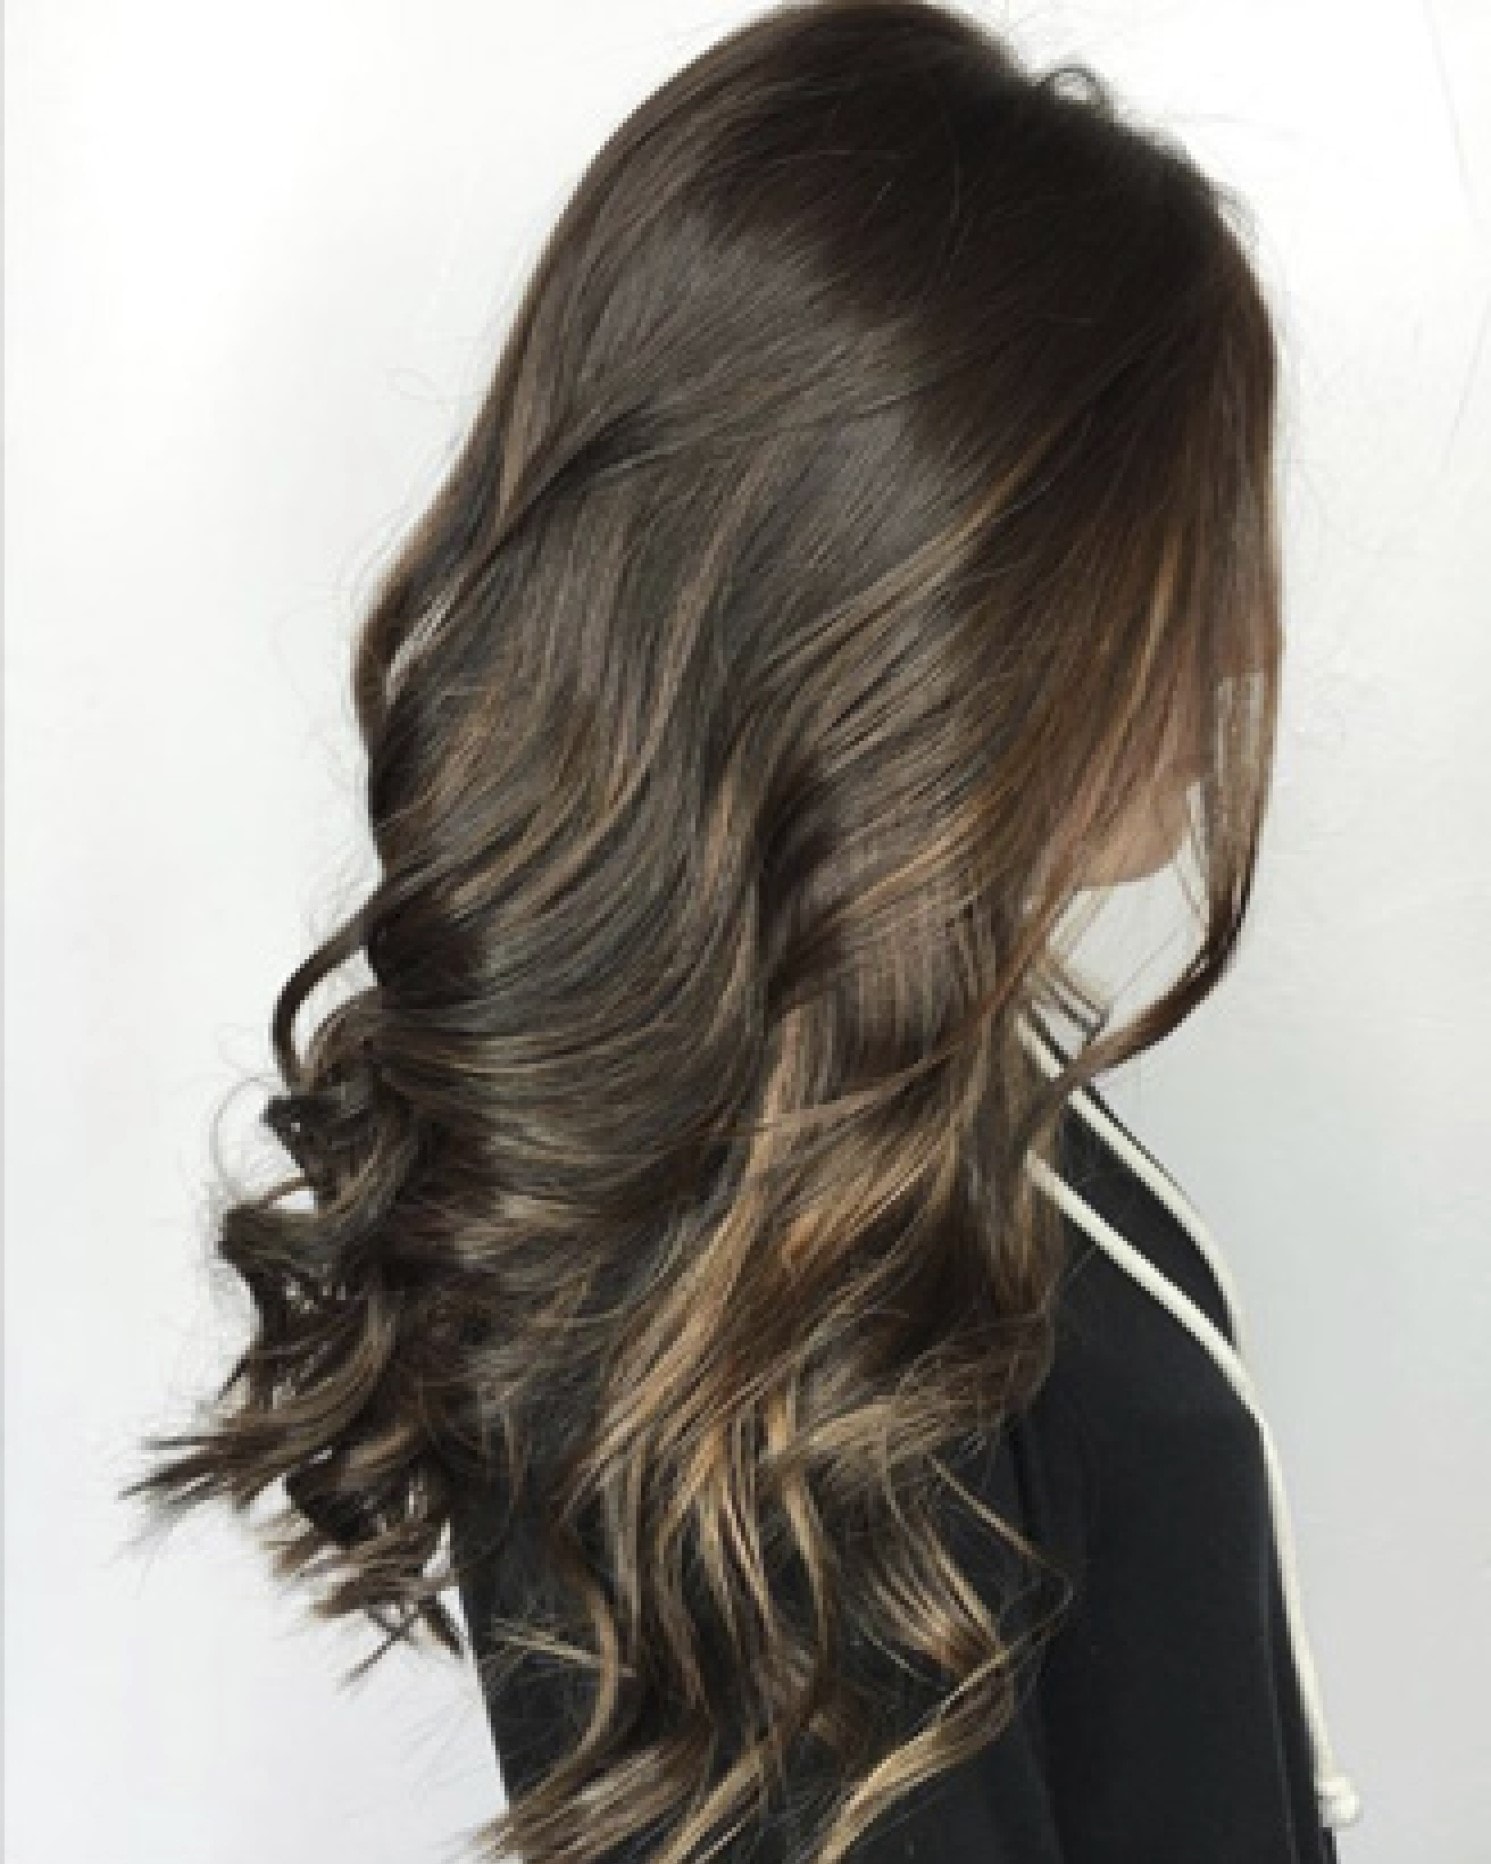 Shiny curled long brunette brown hair